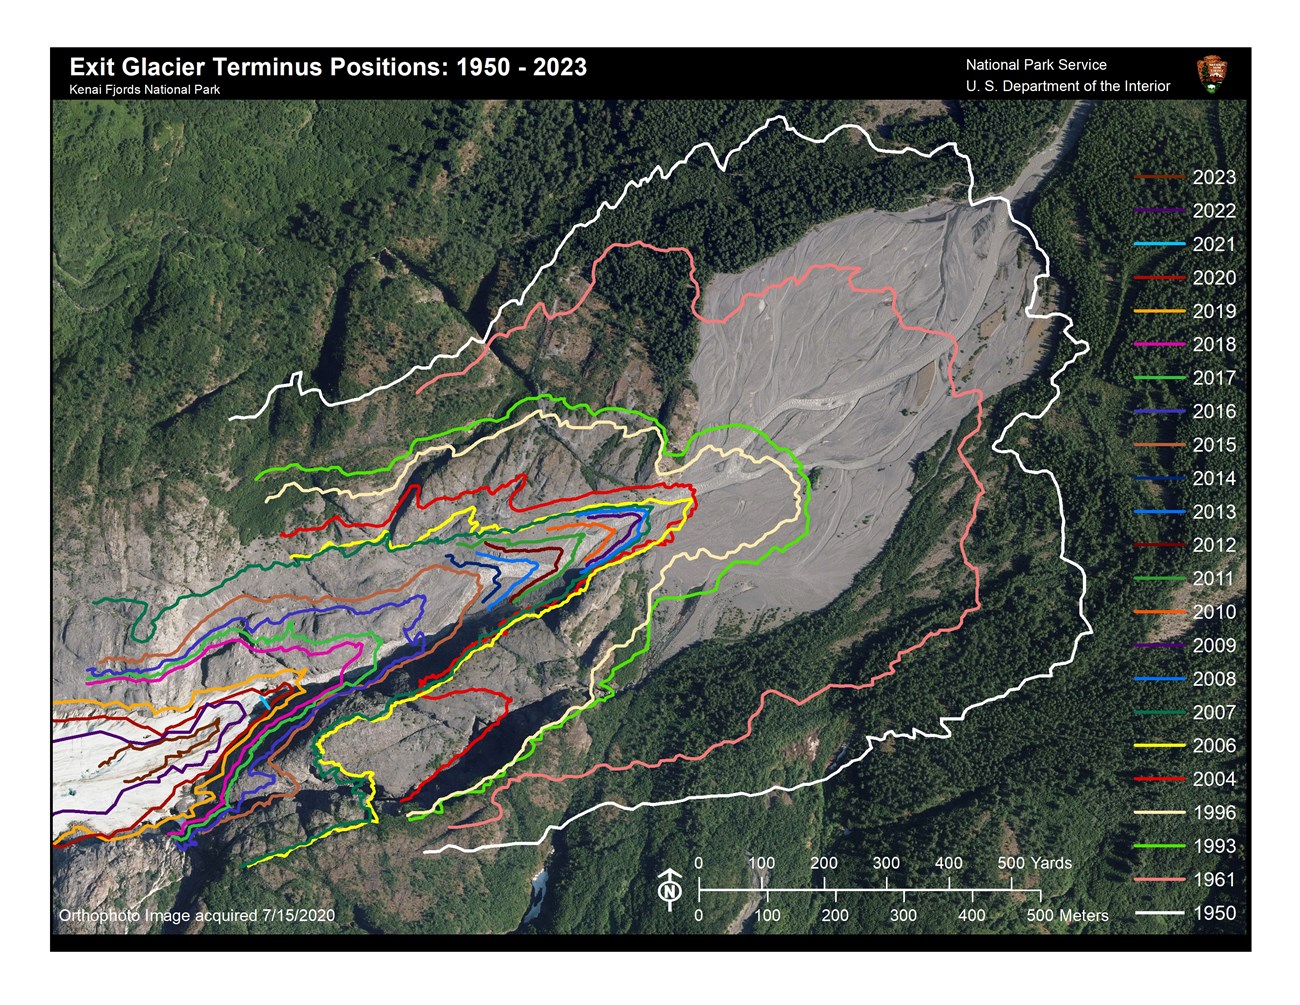 An aerial view of Exit Glacier.  Colored lines on the map denote the different years that the Exit Glacier Terminus was at those places.